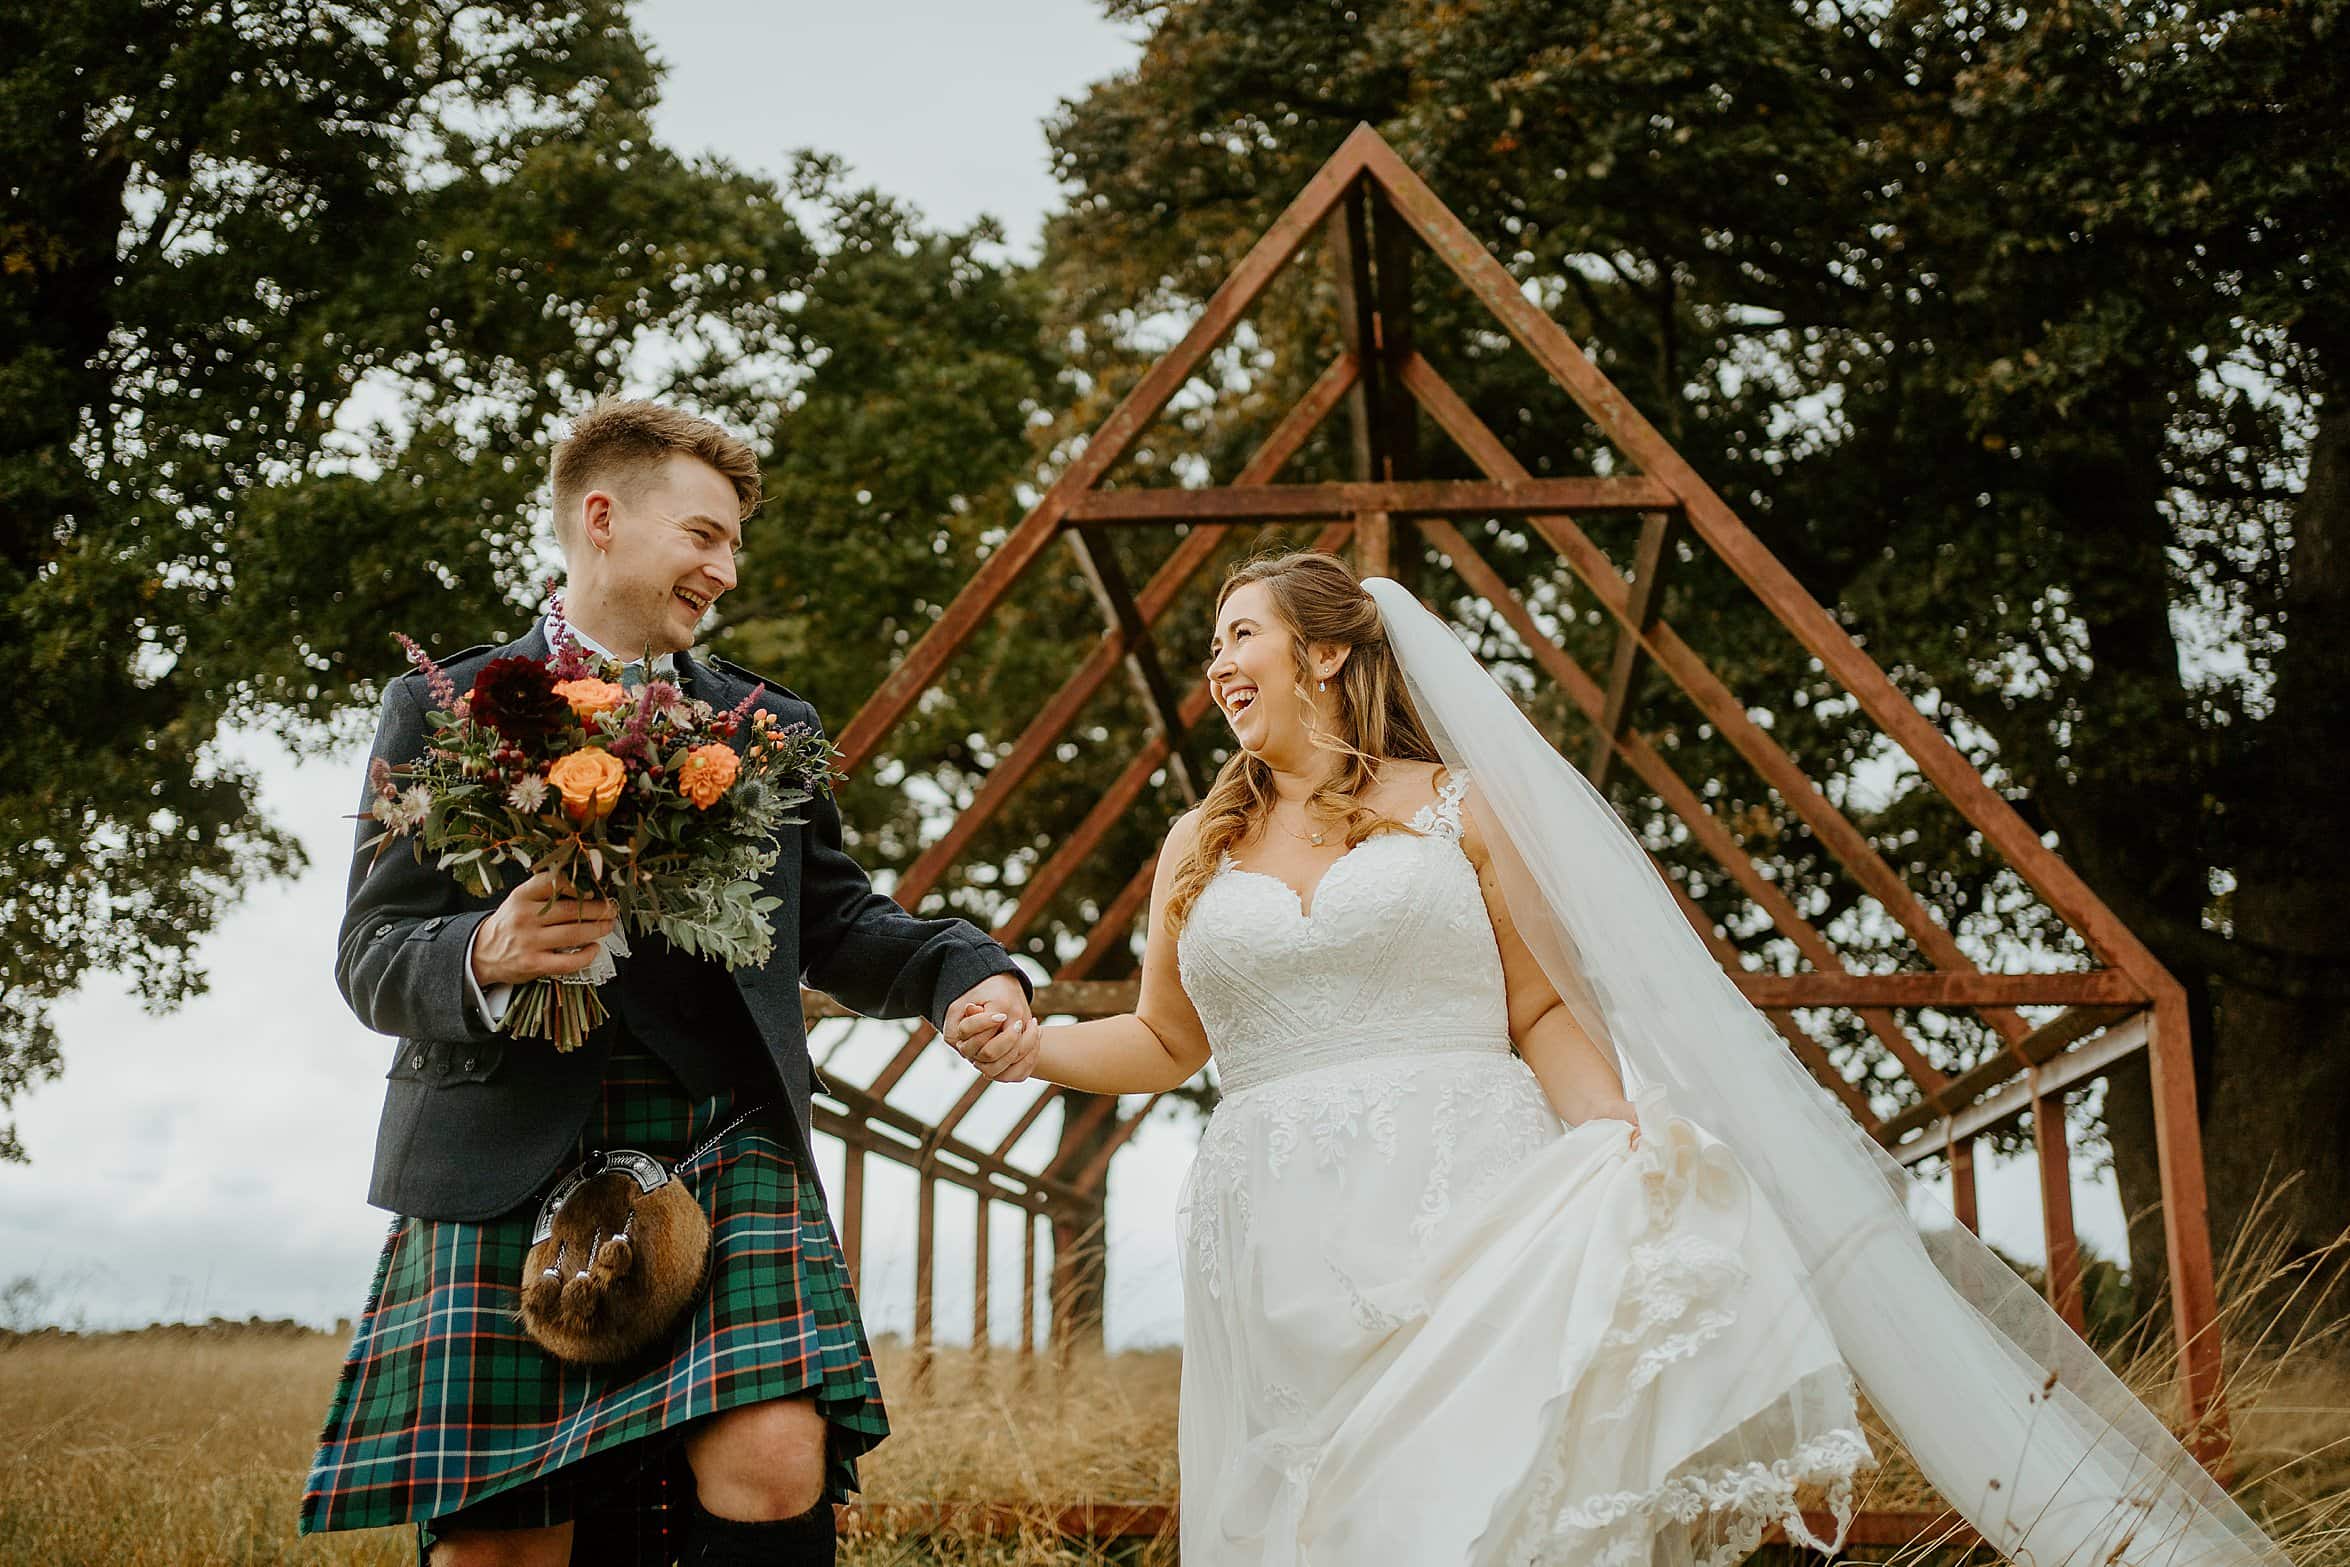 bride wearing white dress and groom wearing kilt outfit laughing as they hold hands in field with trees and building frame in background duntarvie castle wedding